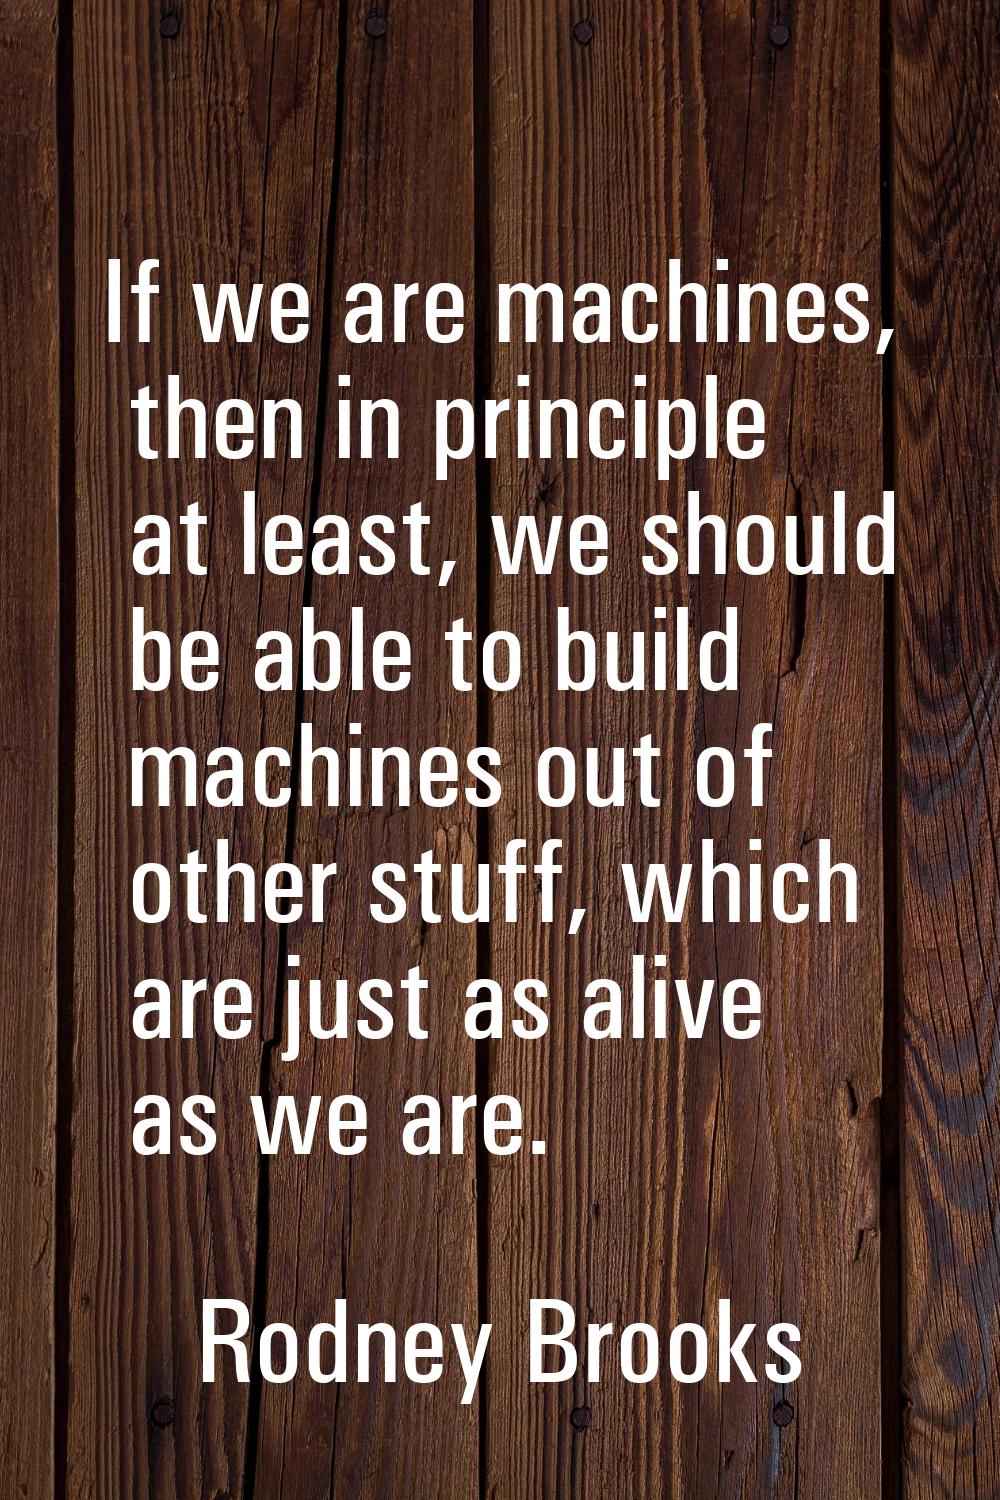 If we are machines, then in principle at least, we should be able to build machines out of other st